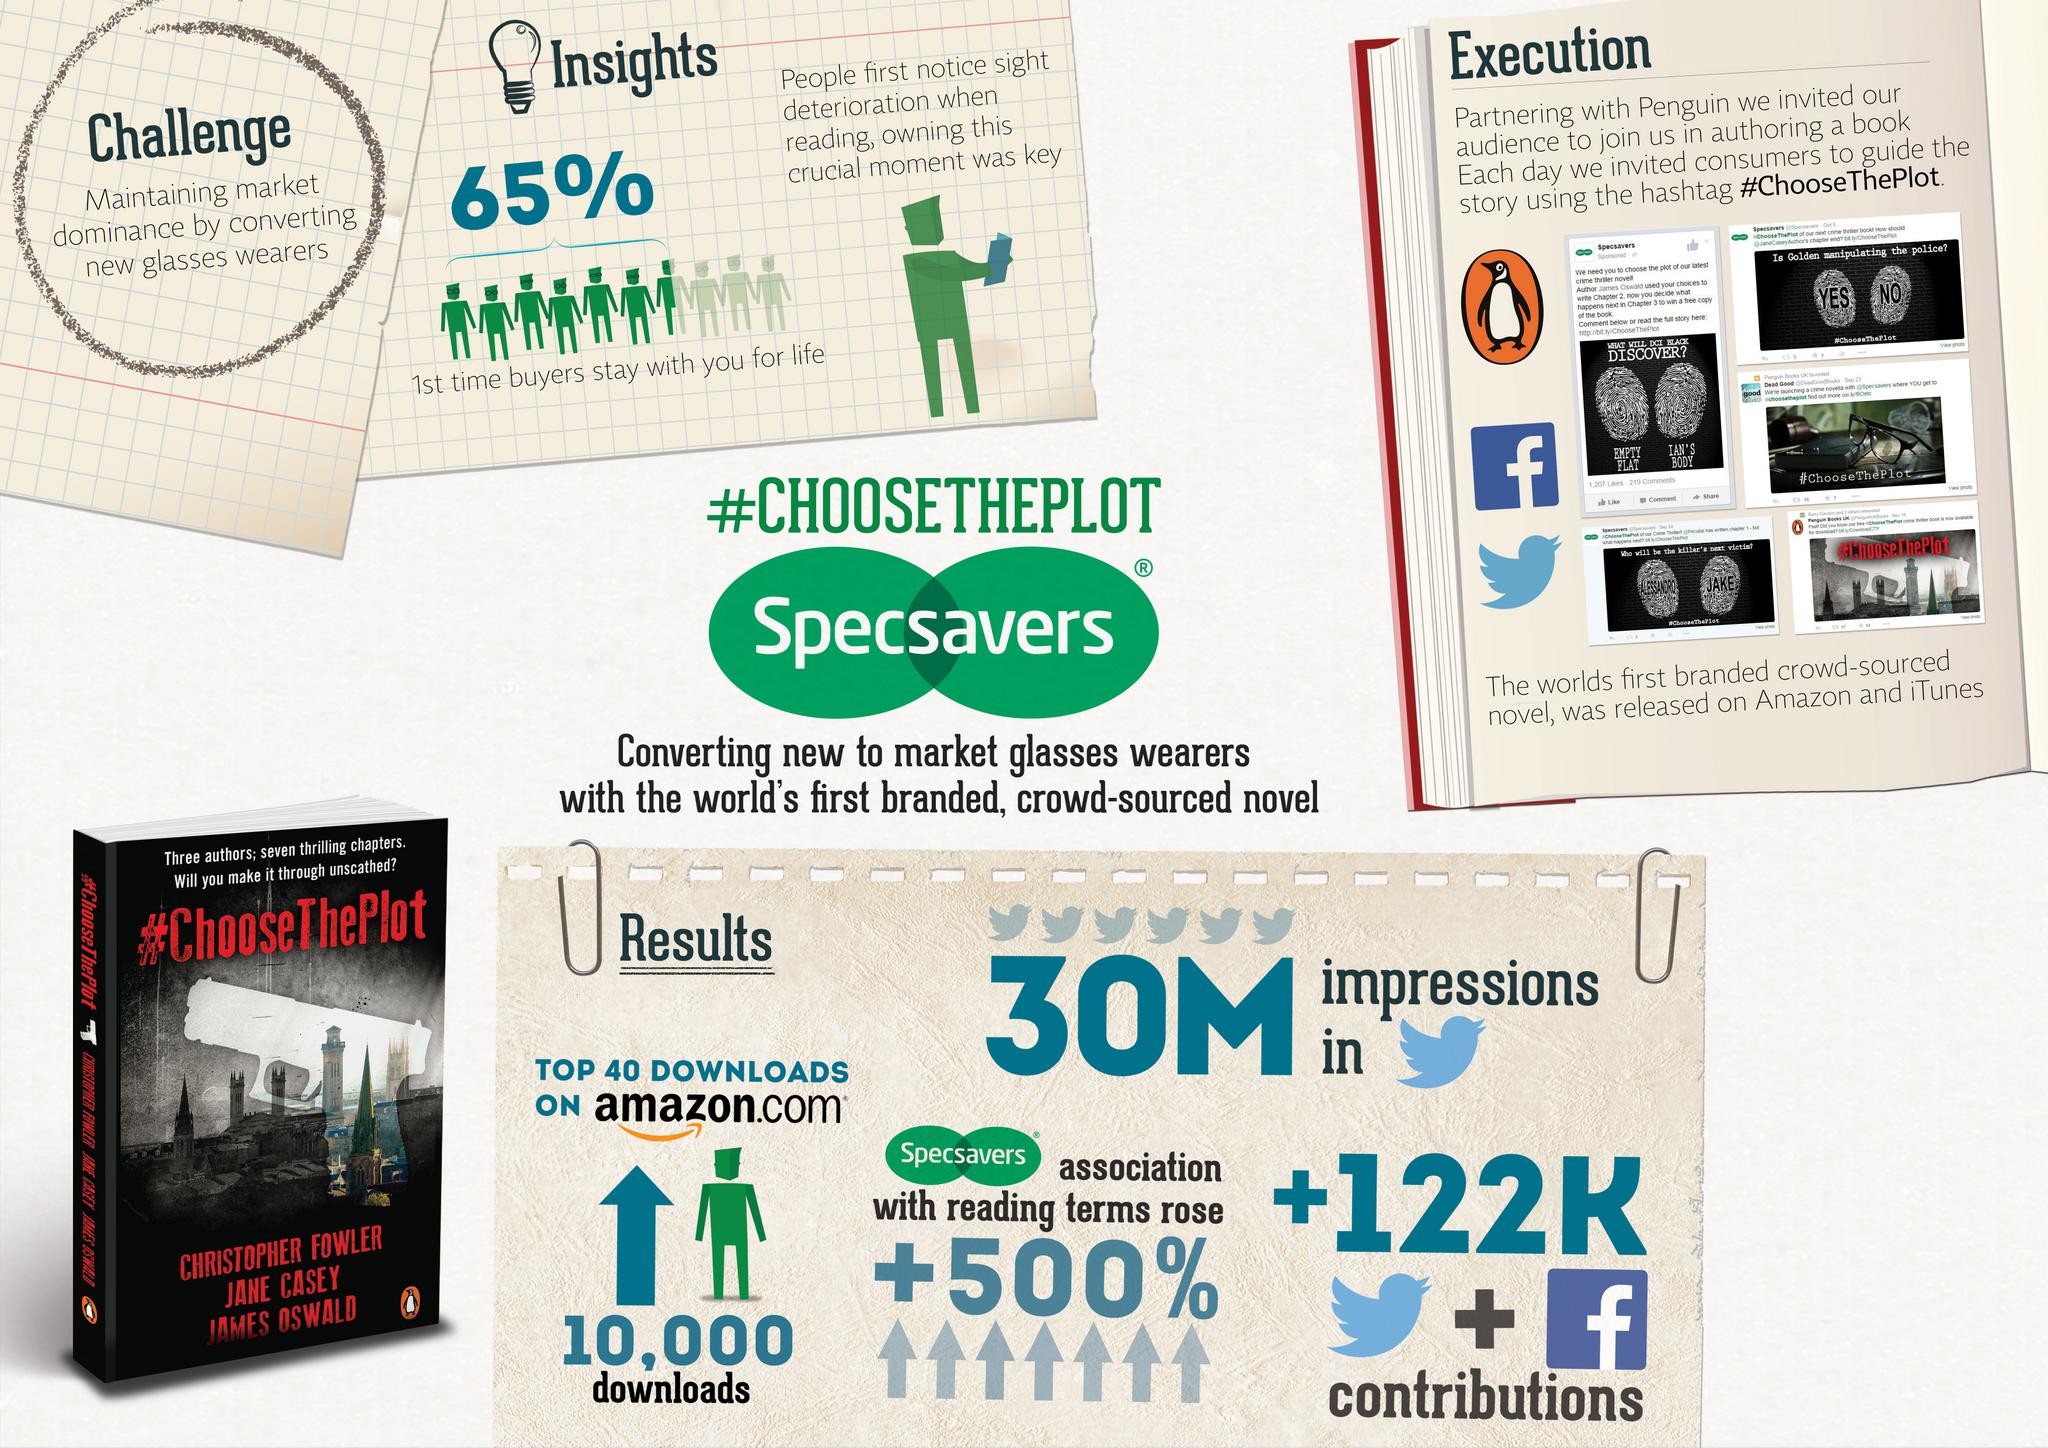 SPECSAVERS - #CHOOSETHEPLOT - THE WORLD'S FIRST BRANDED CROWD-SOURCED NOVEL